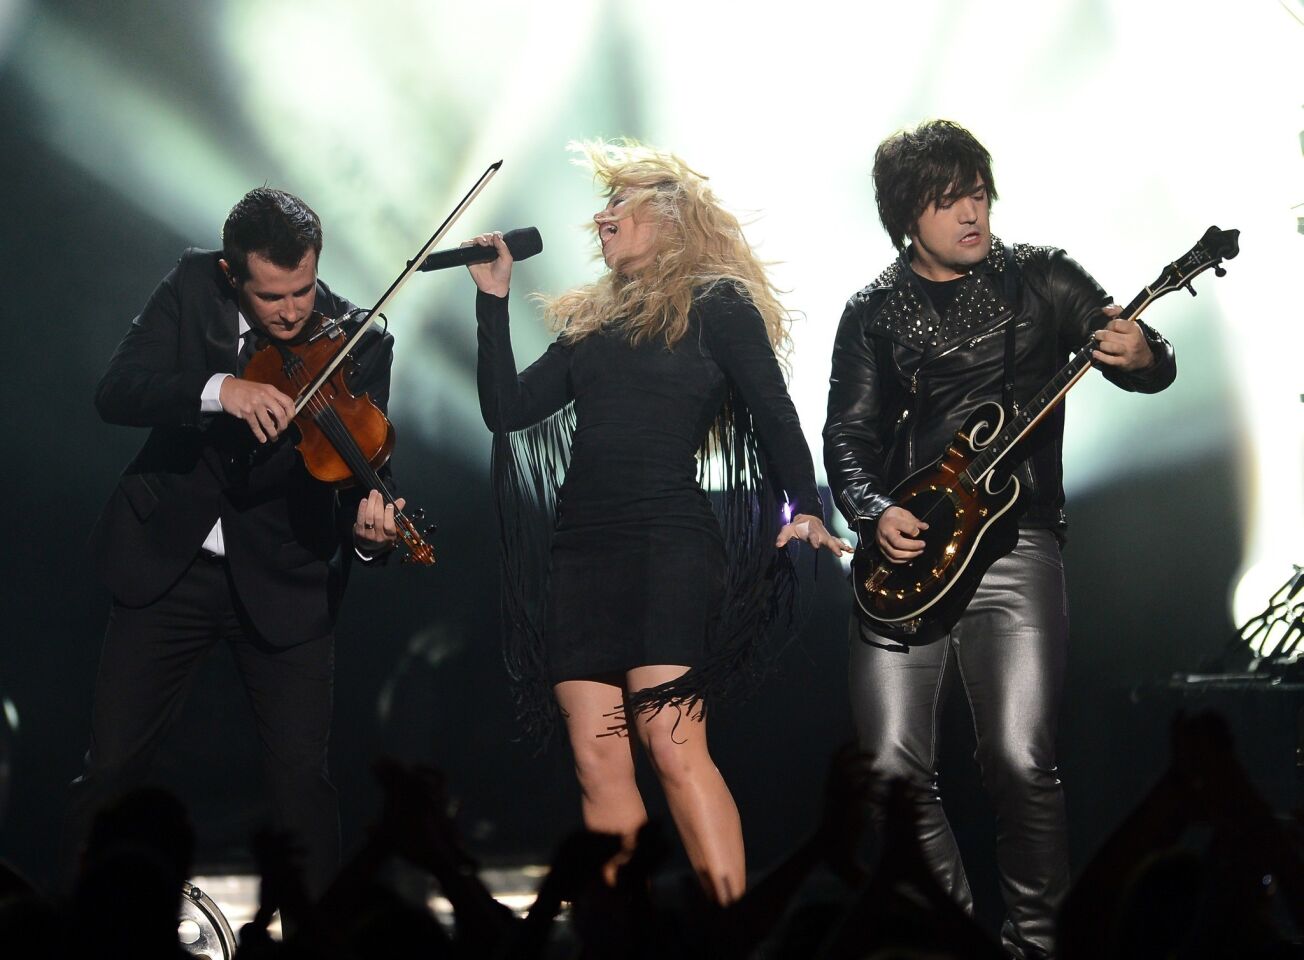 Singer Kimberly Perry, center, and musician Neil Perry, right, of the Band Perry perform onstage during the 2013 Billboard Music Awards.